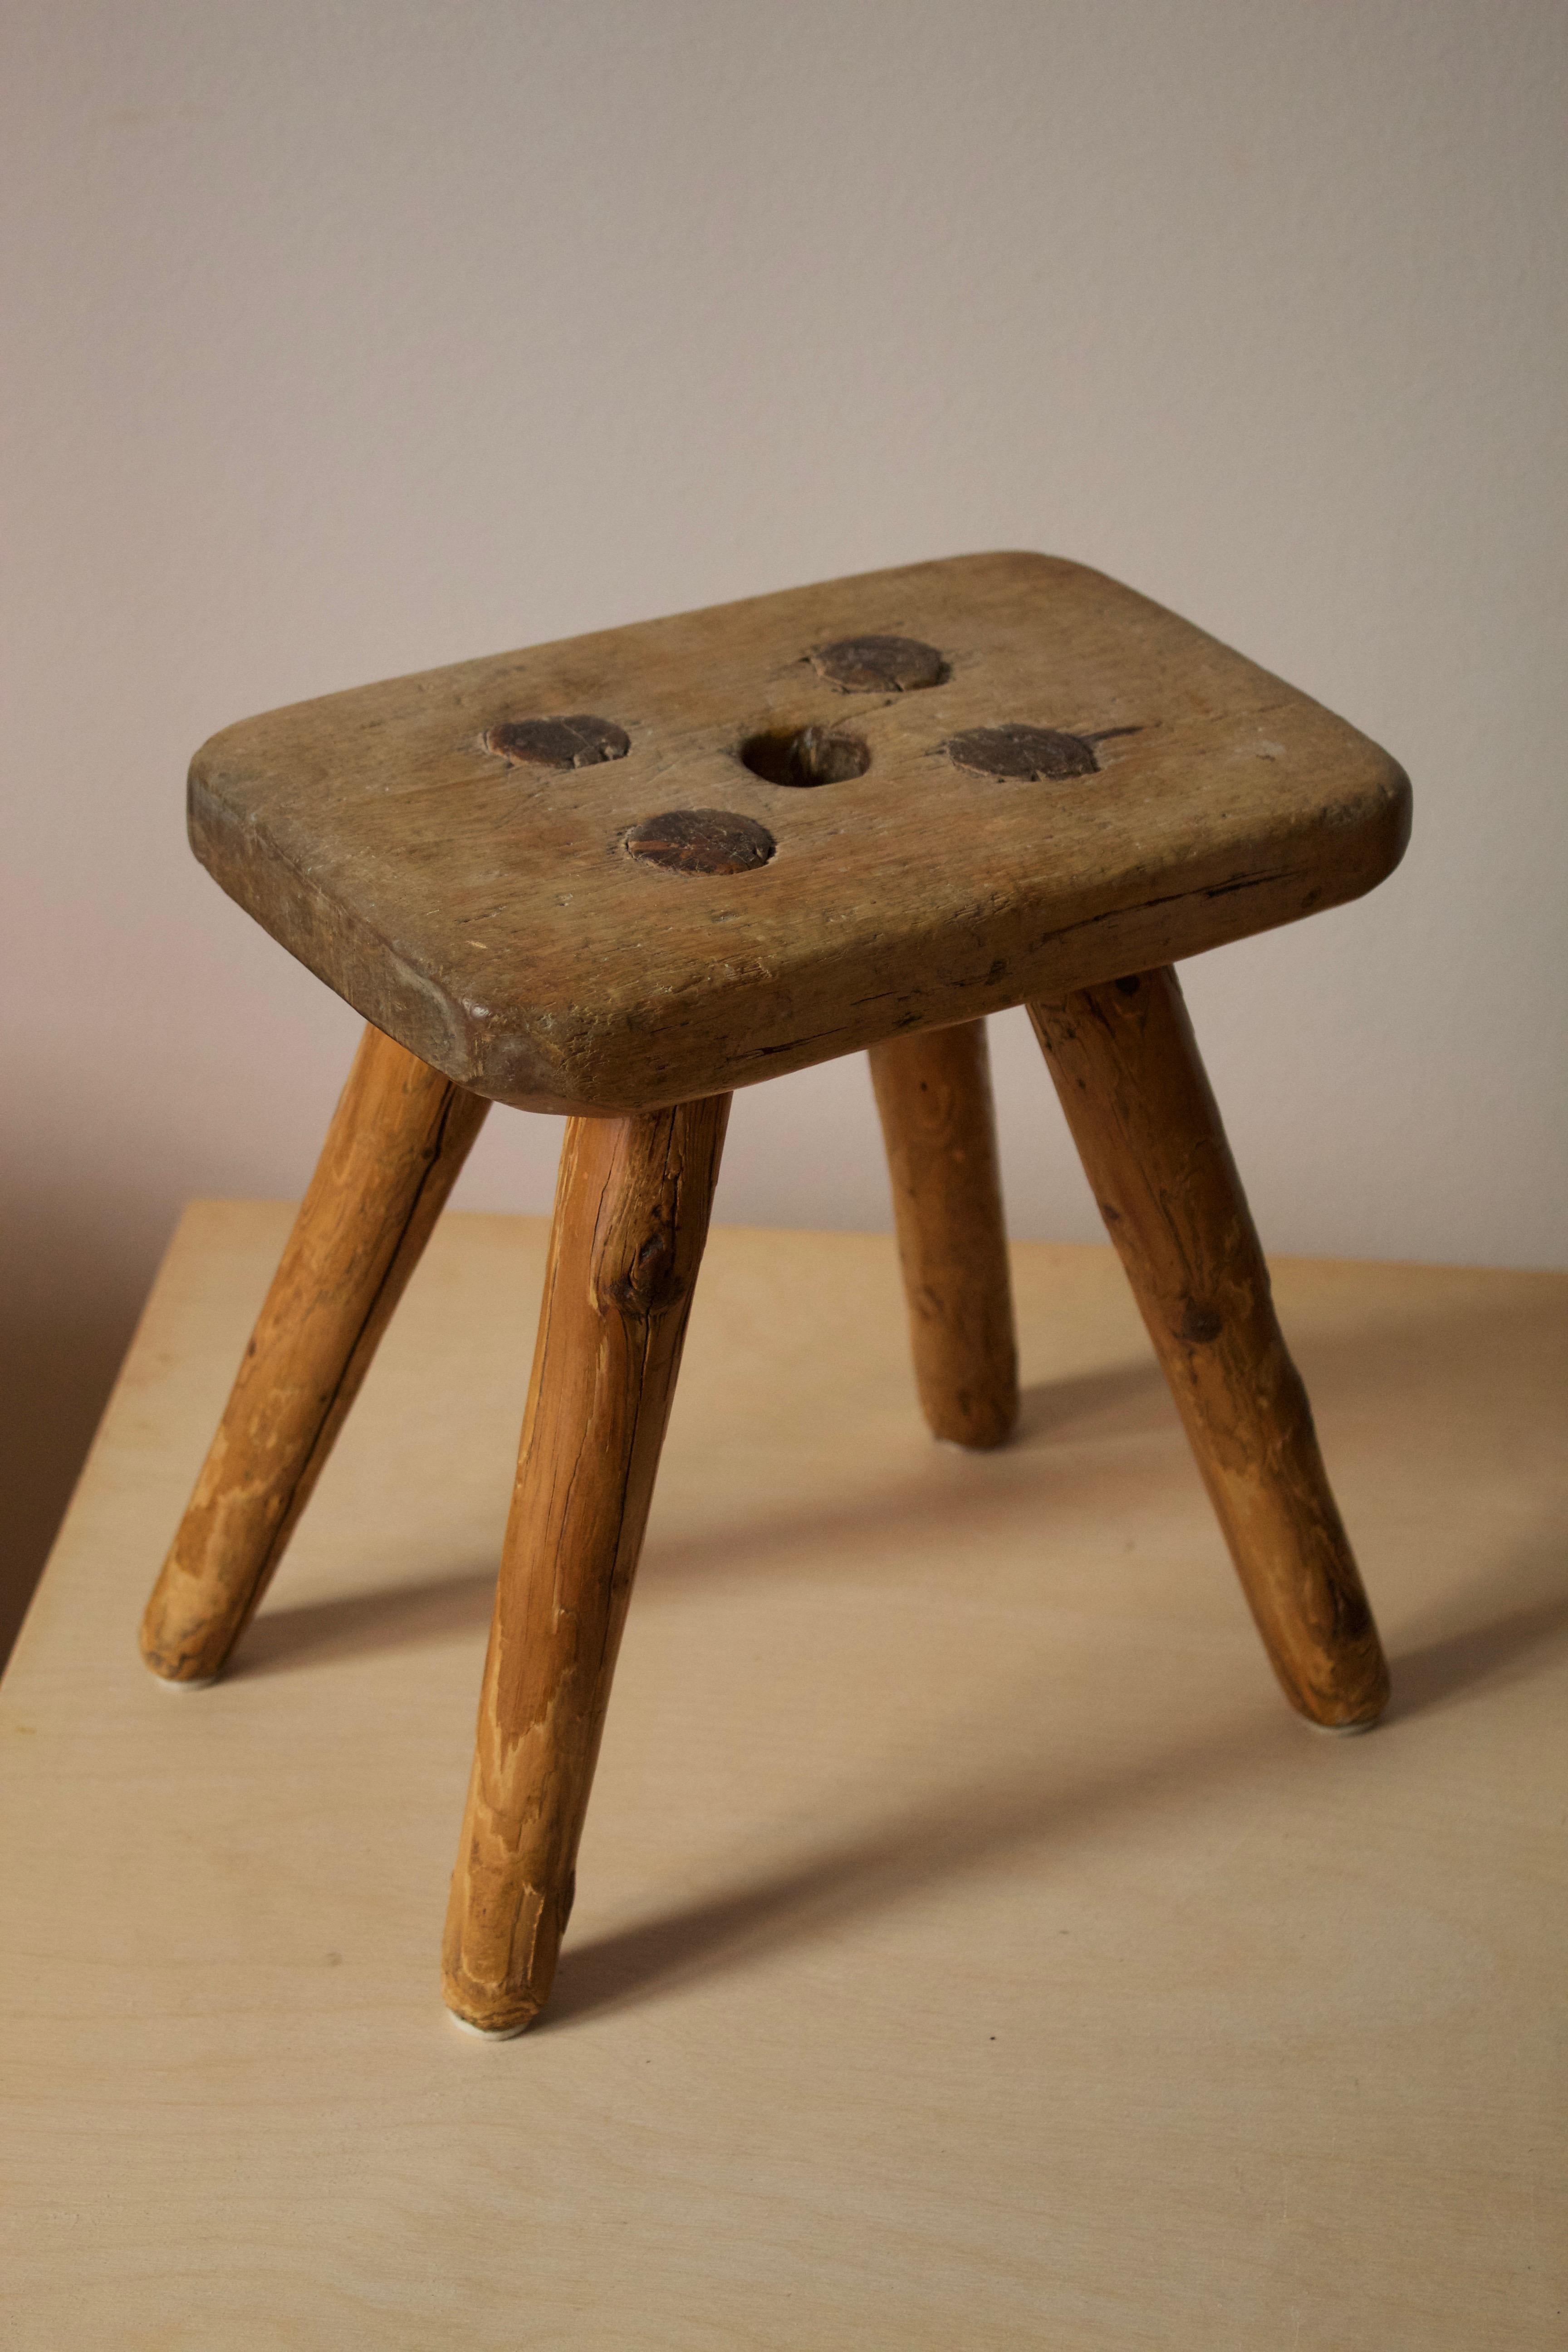 A very small milking stool, Swedish folk craft, c. 1900. Features revealed joinery.